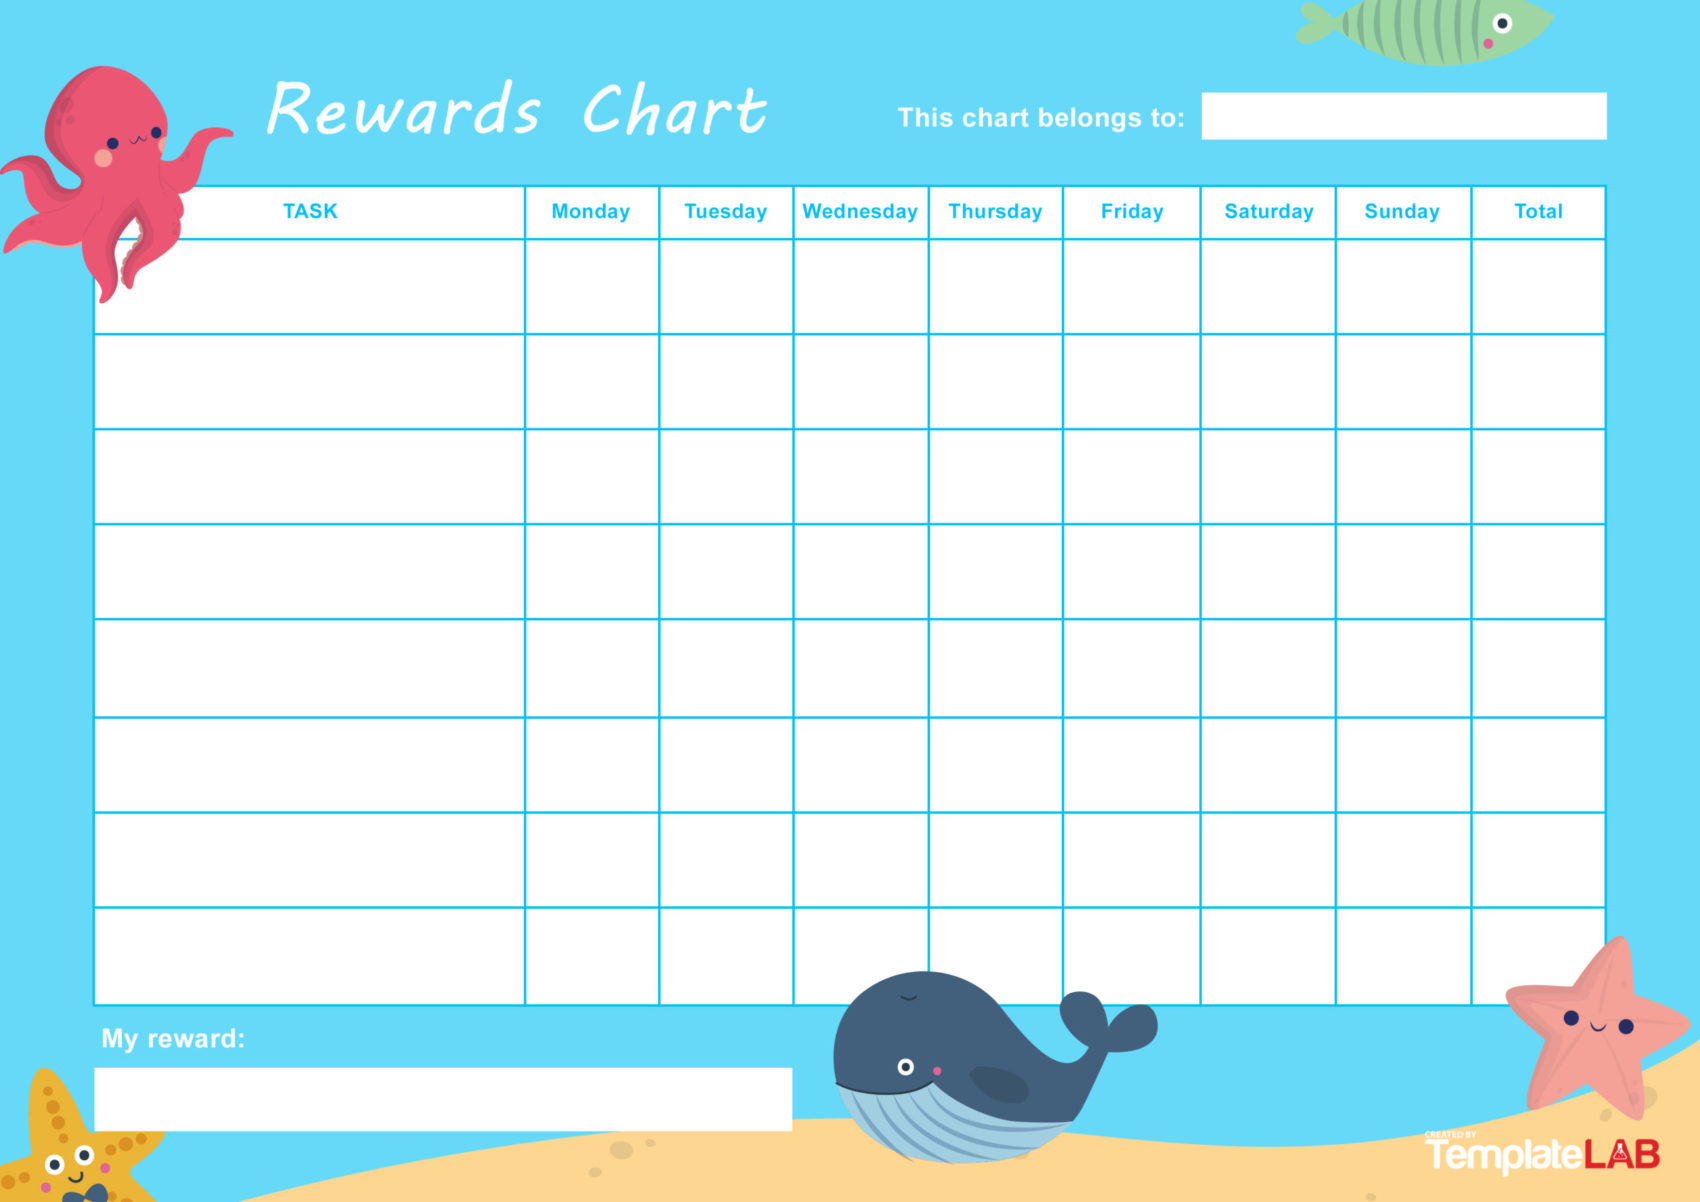 Free Printable Behavior Charts For First Graders Chart Walls